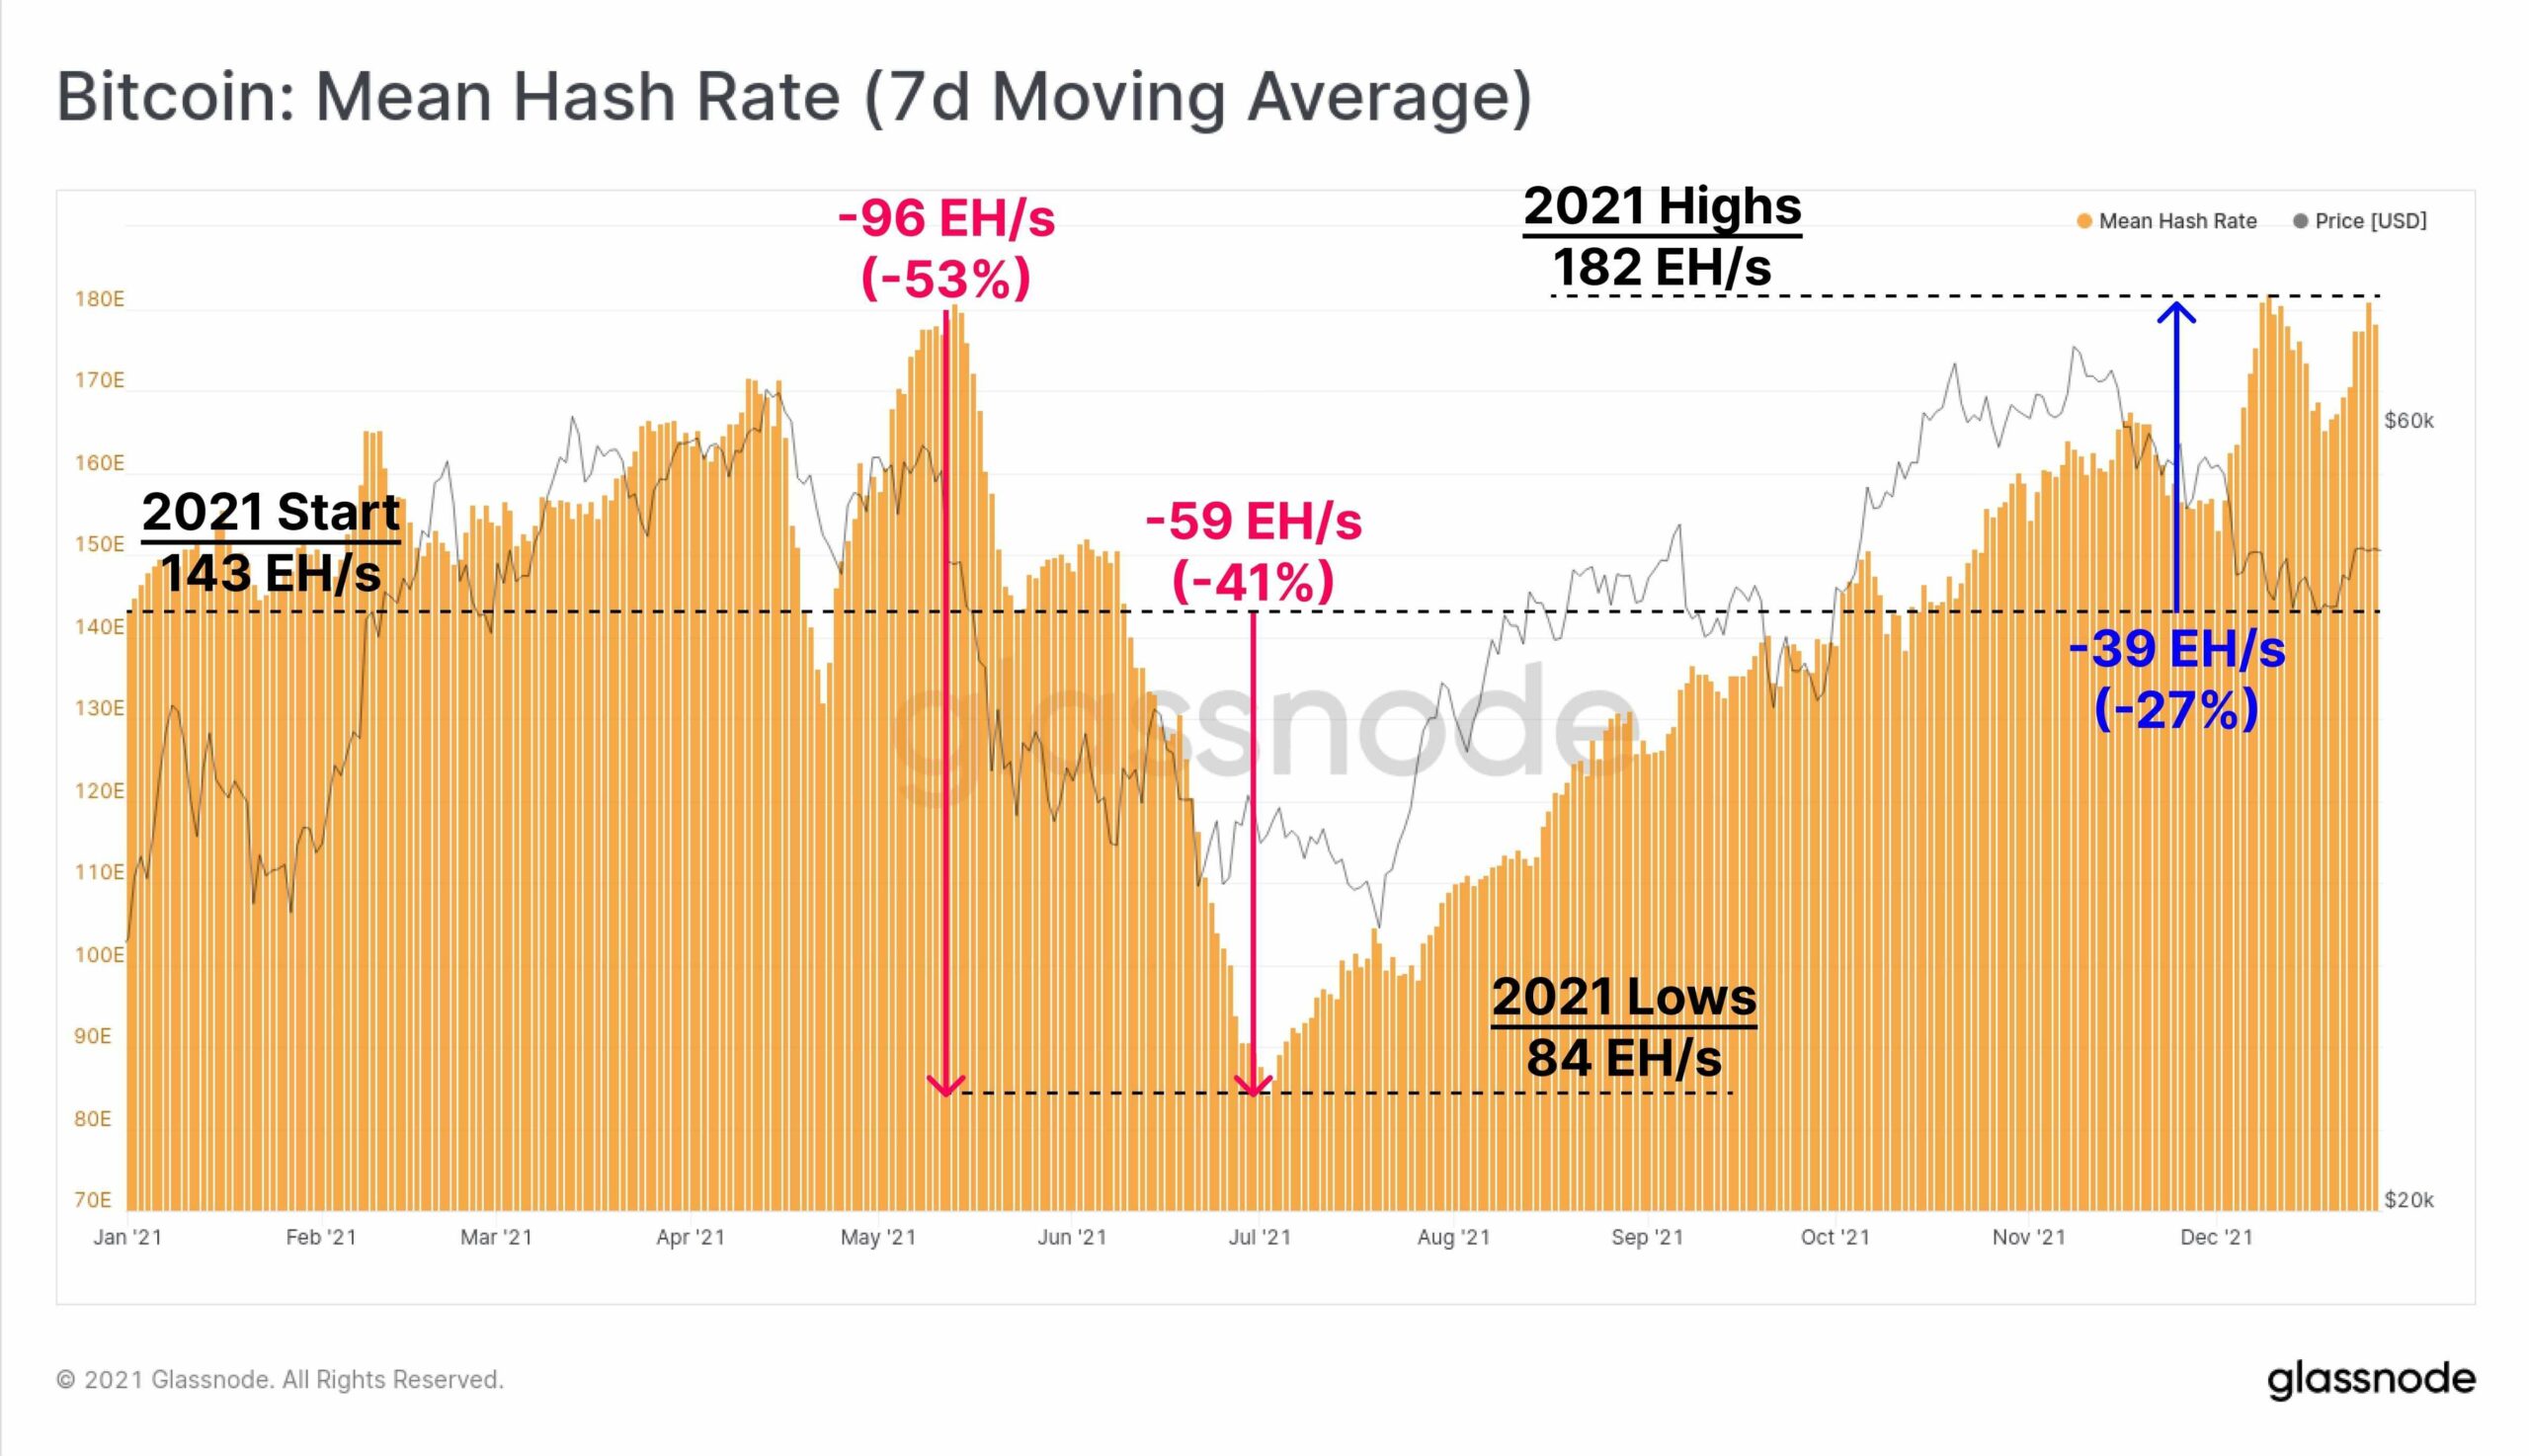 Bitcoin: Mean Hash Rate (7d Moving Average)